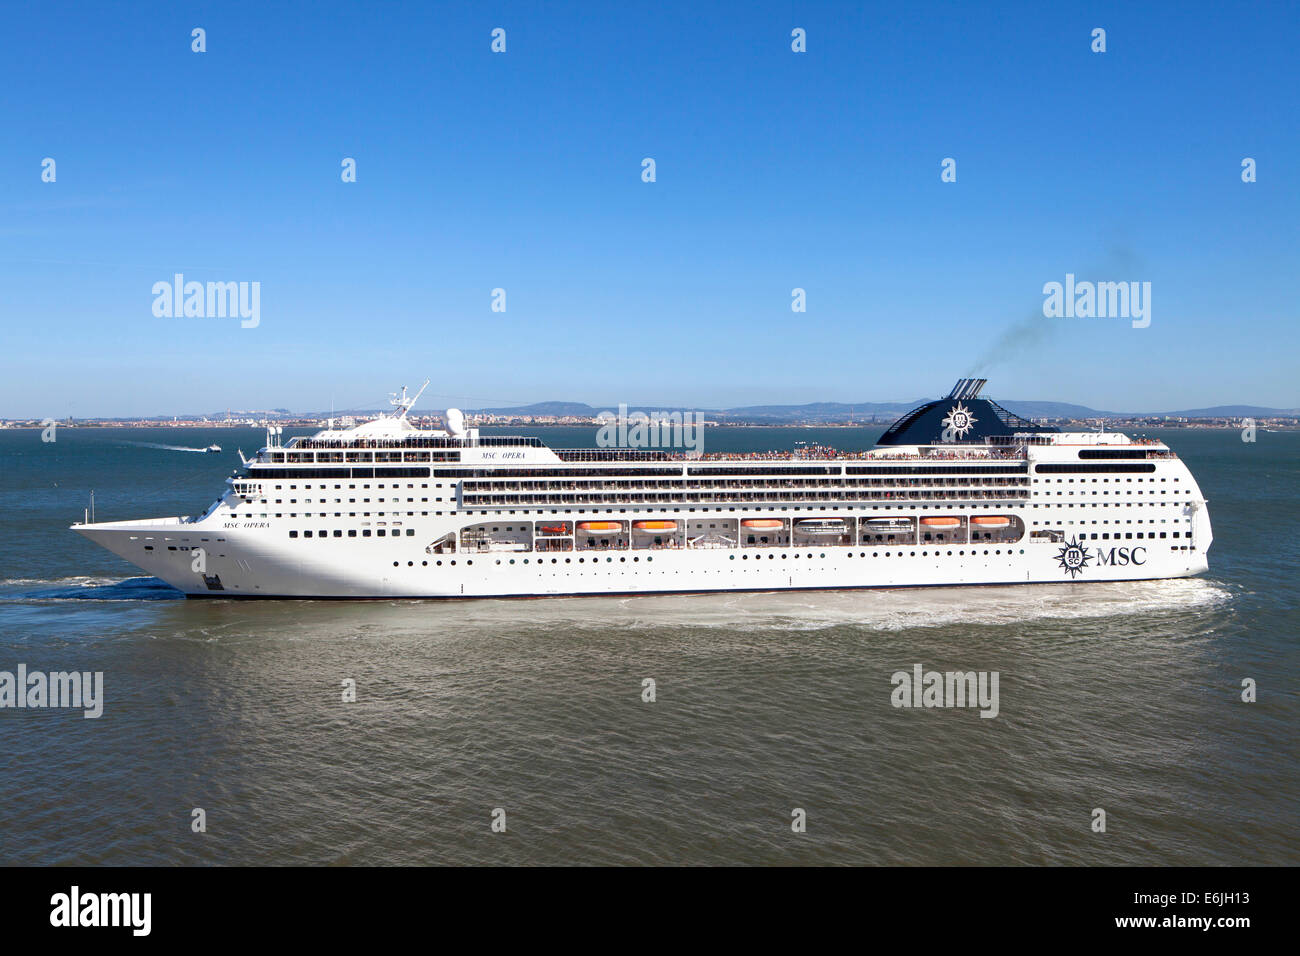 MSC Opera cruise ship built in 2004 and currently operated by MSC Cruises in the Mediterranean sea Stock Photo